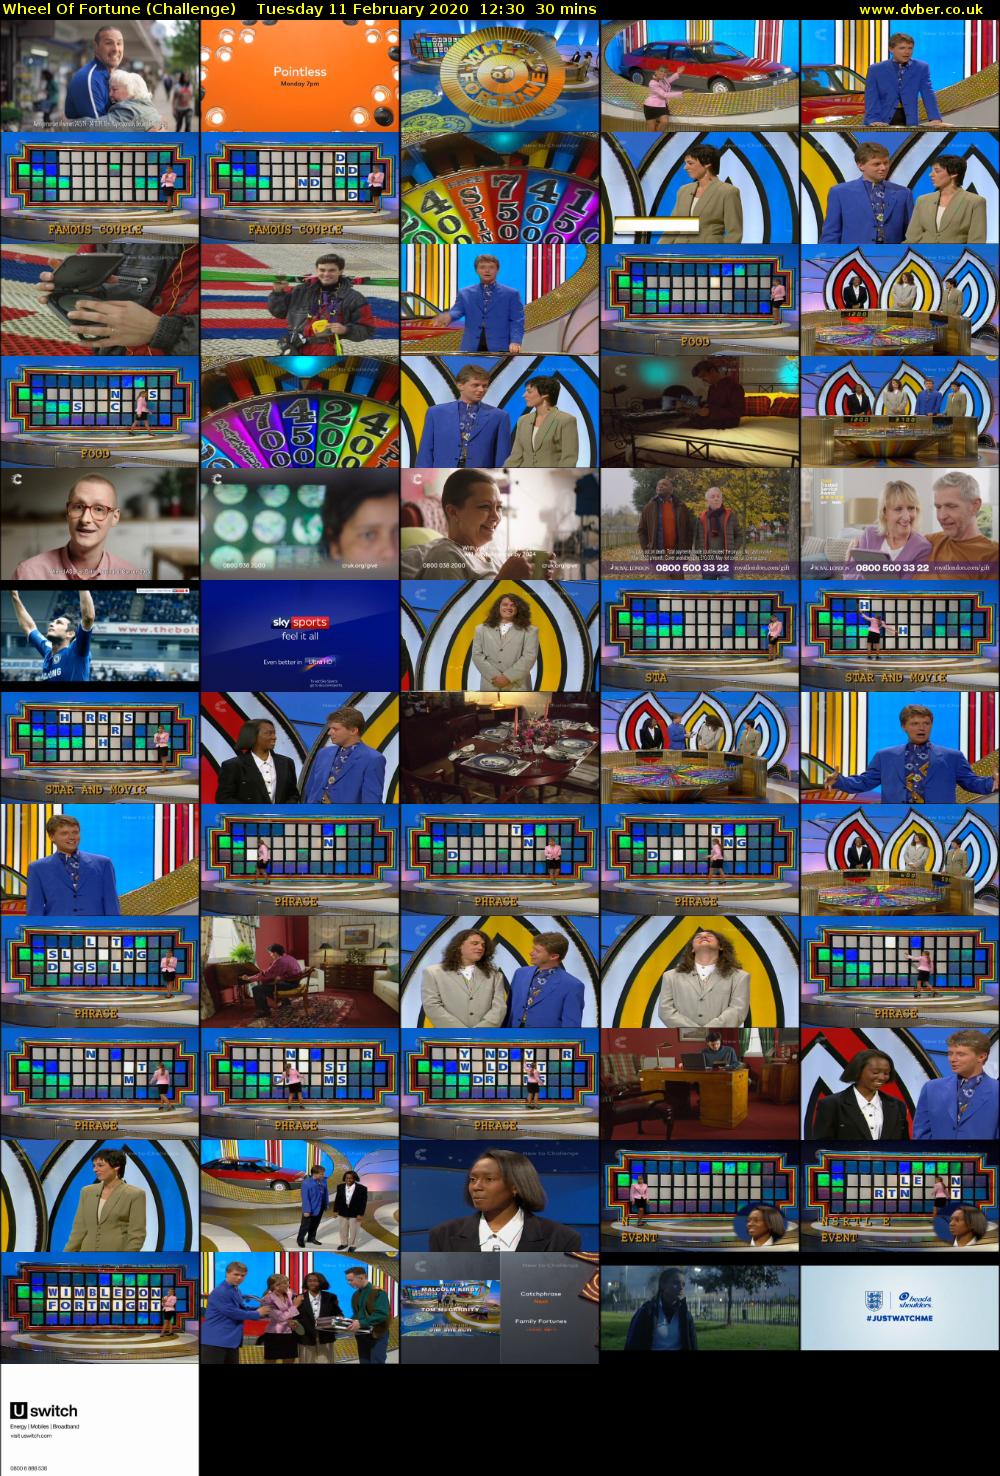 Wheel Of Fortune (Challenge) Tuesday 11 February 2020 12:30 - 13:00